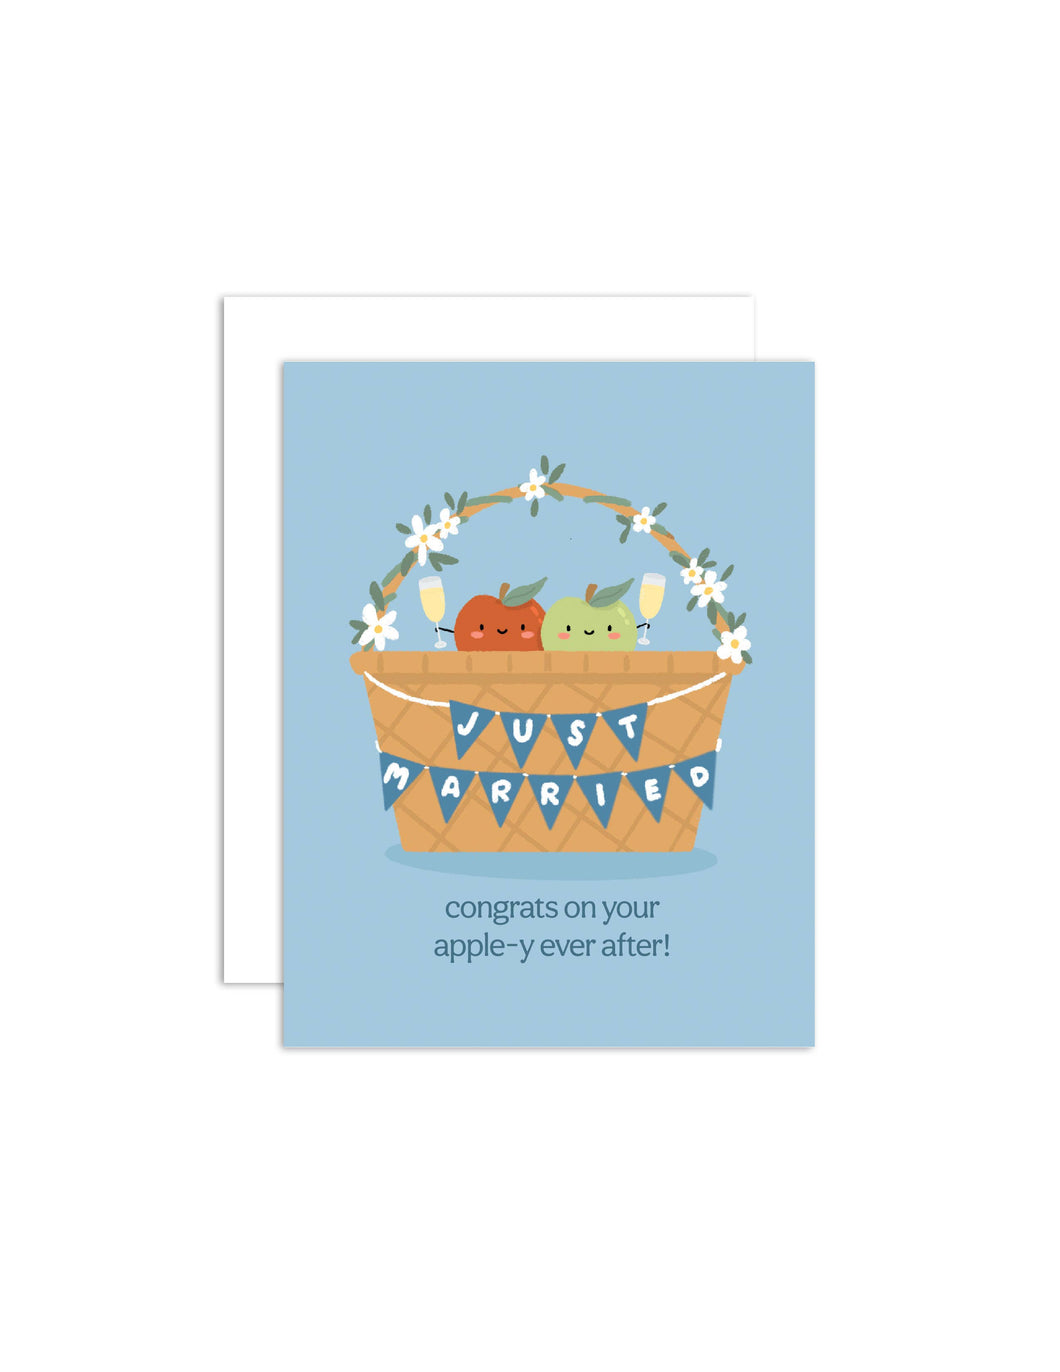 Apple-y Ever After - Wedding/Engagement Greeting Card